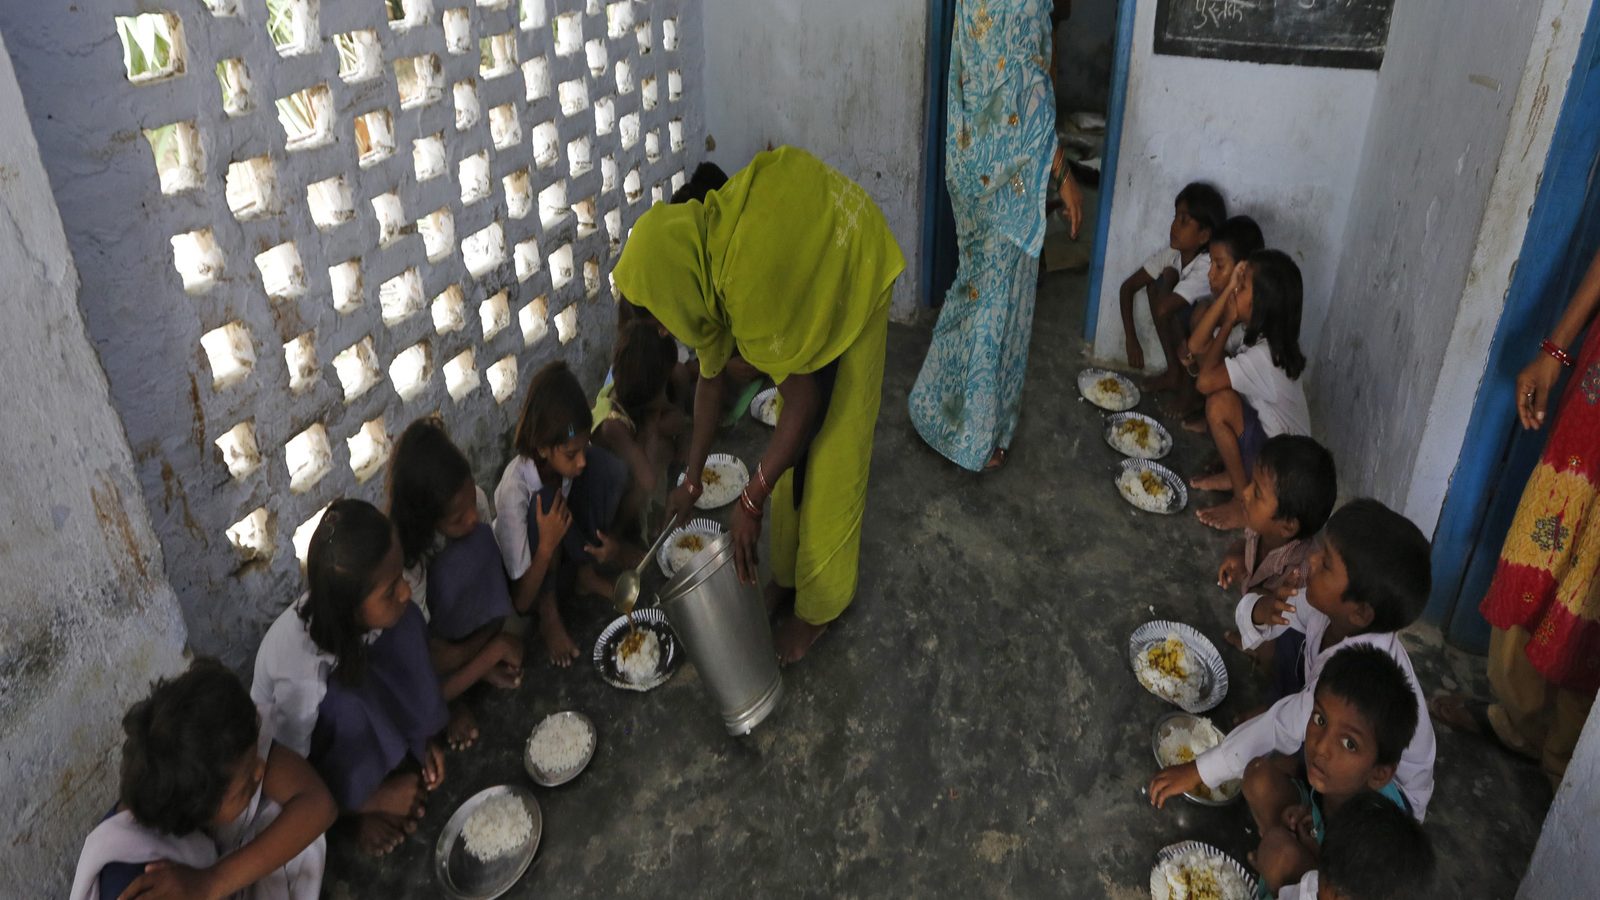 IISC to Set up Research Lab to Study Child Food Security, Aims to End Classroom Hunger